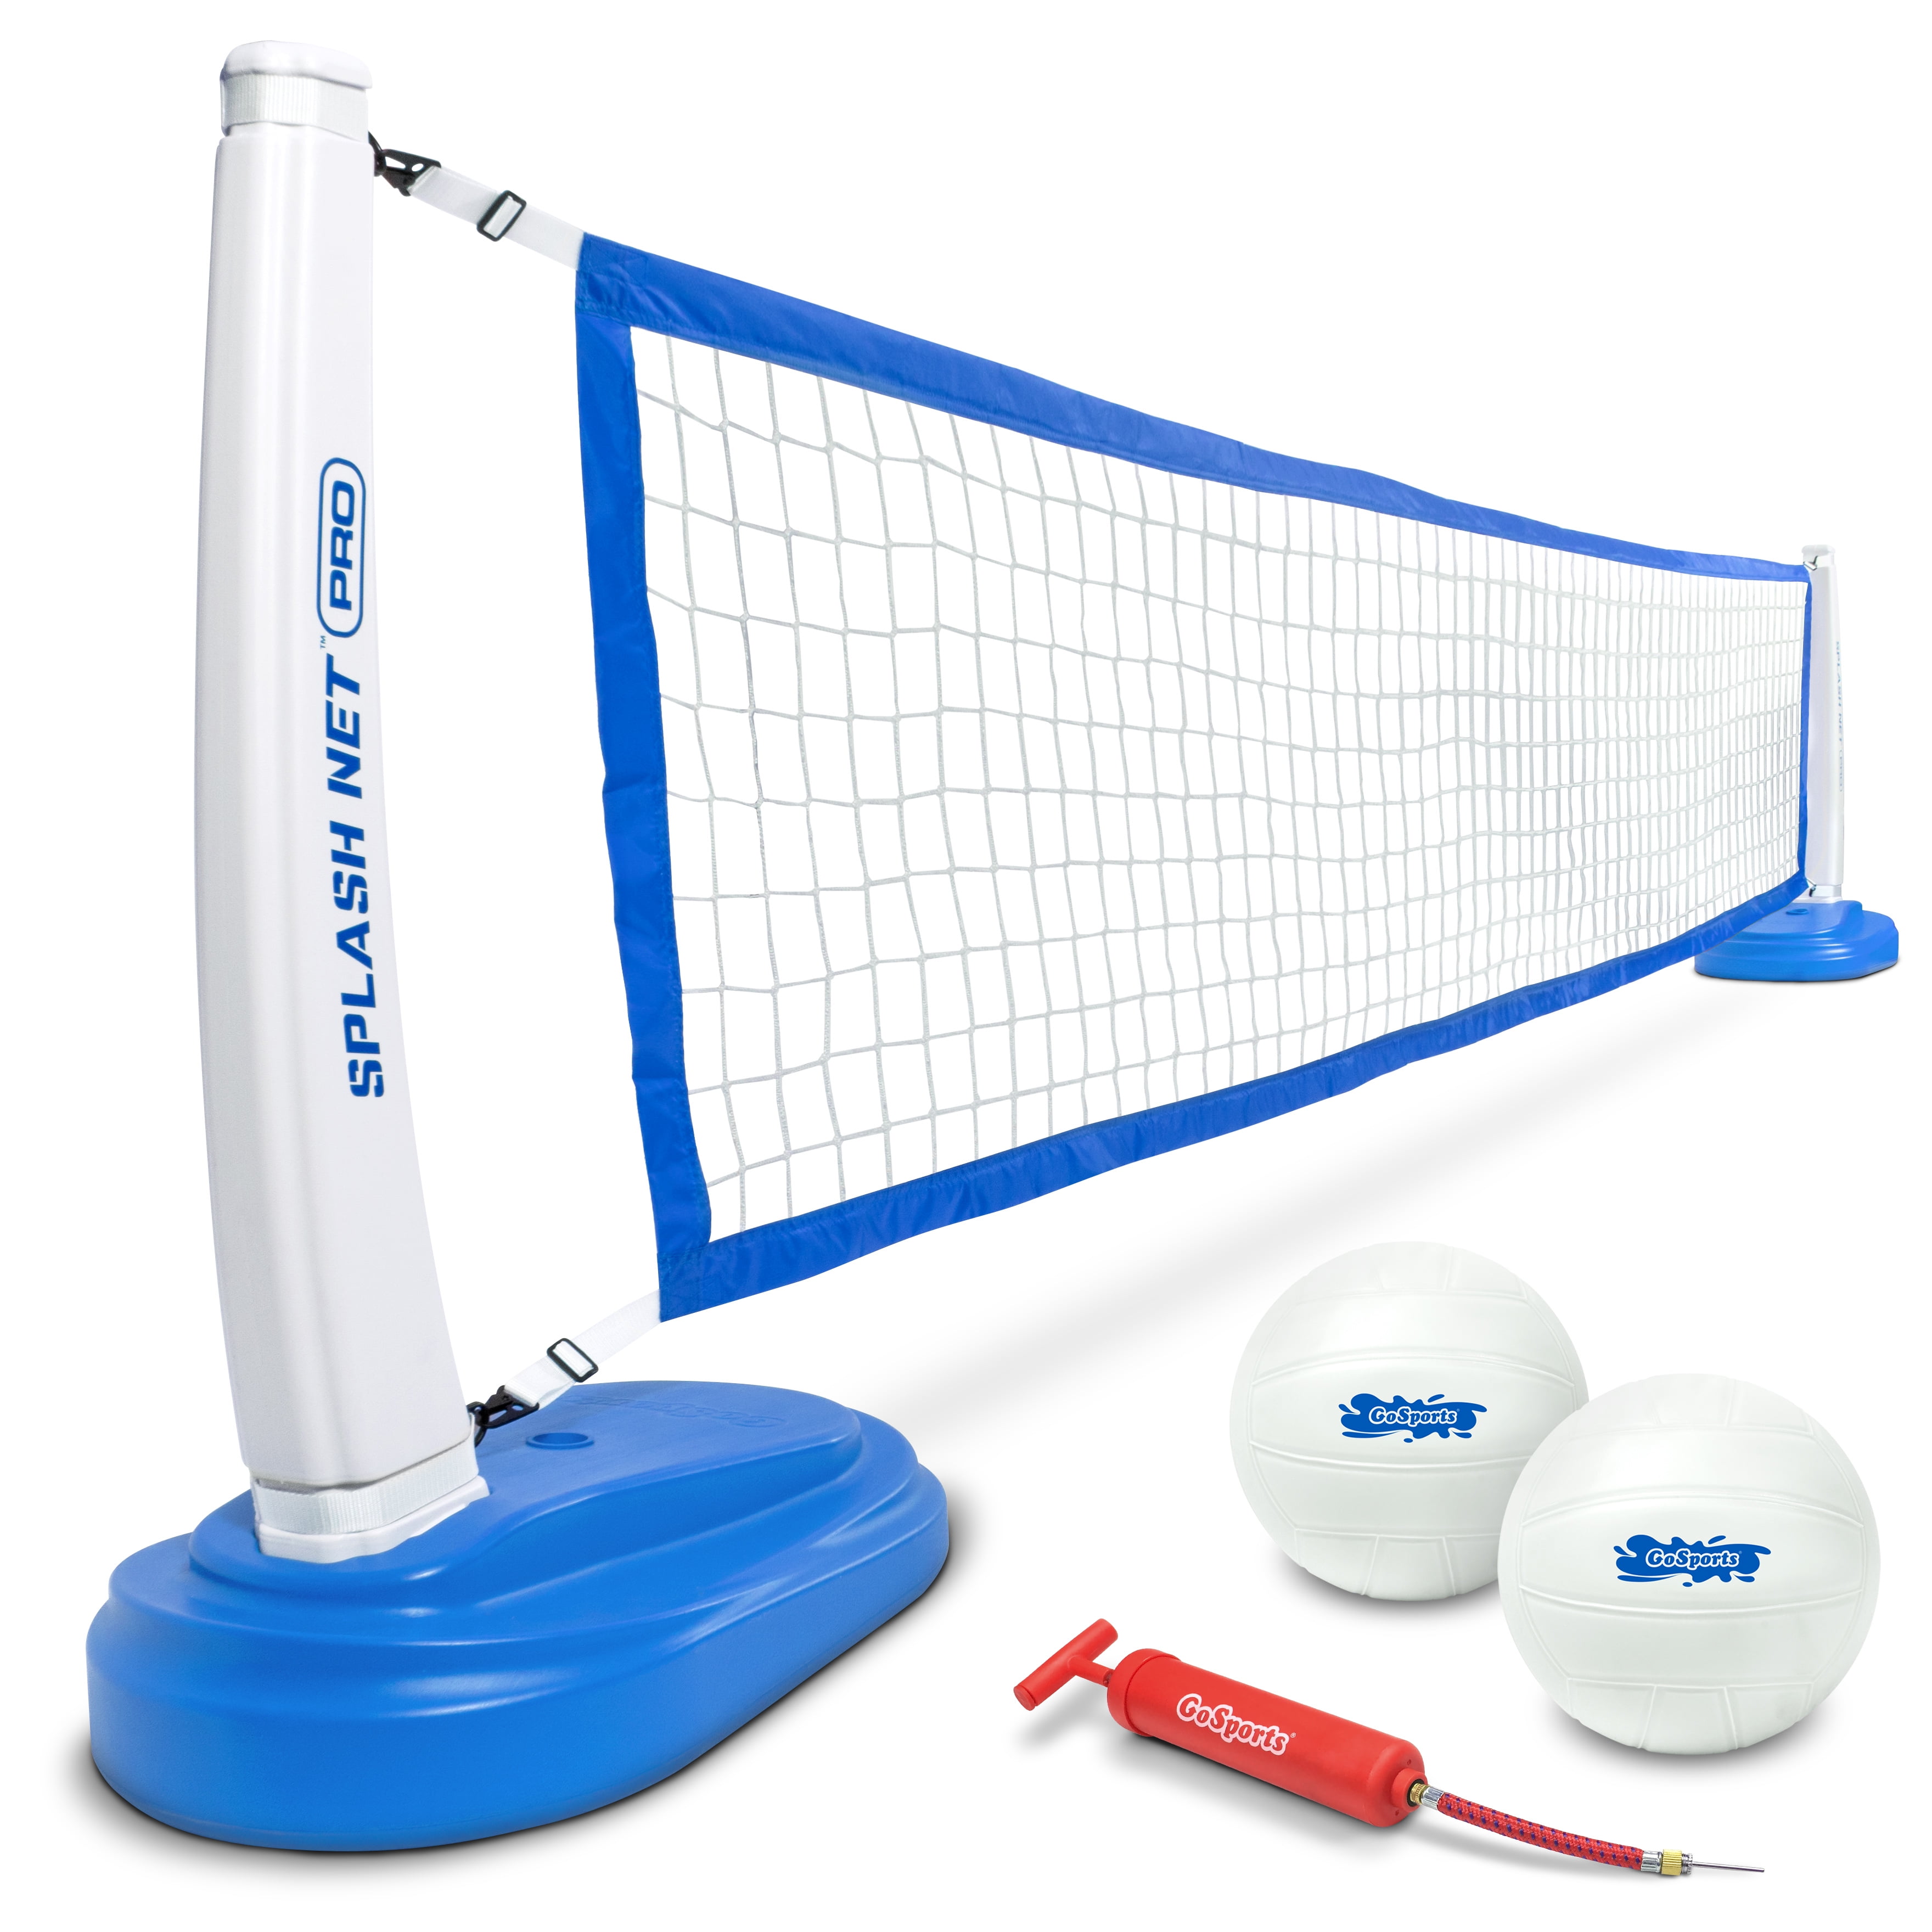 Poolmaster 72776 Above-Ground Mounted Poolside Volleyball Badminton Game with Perma-Top Mounts 